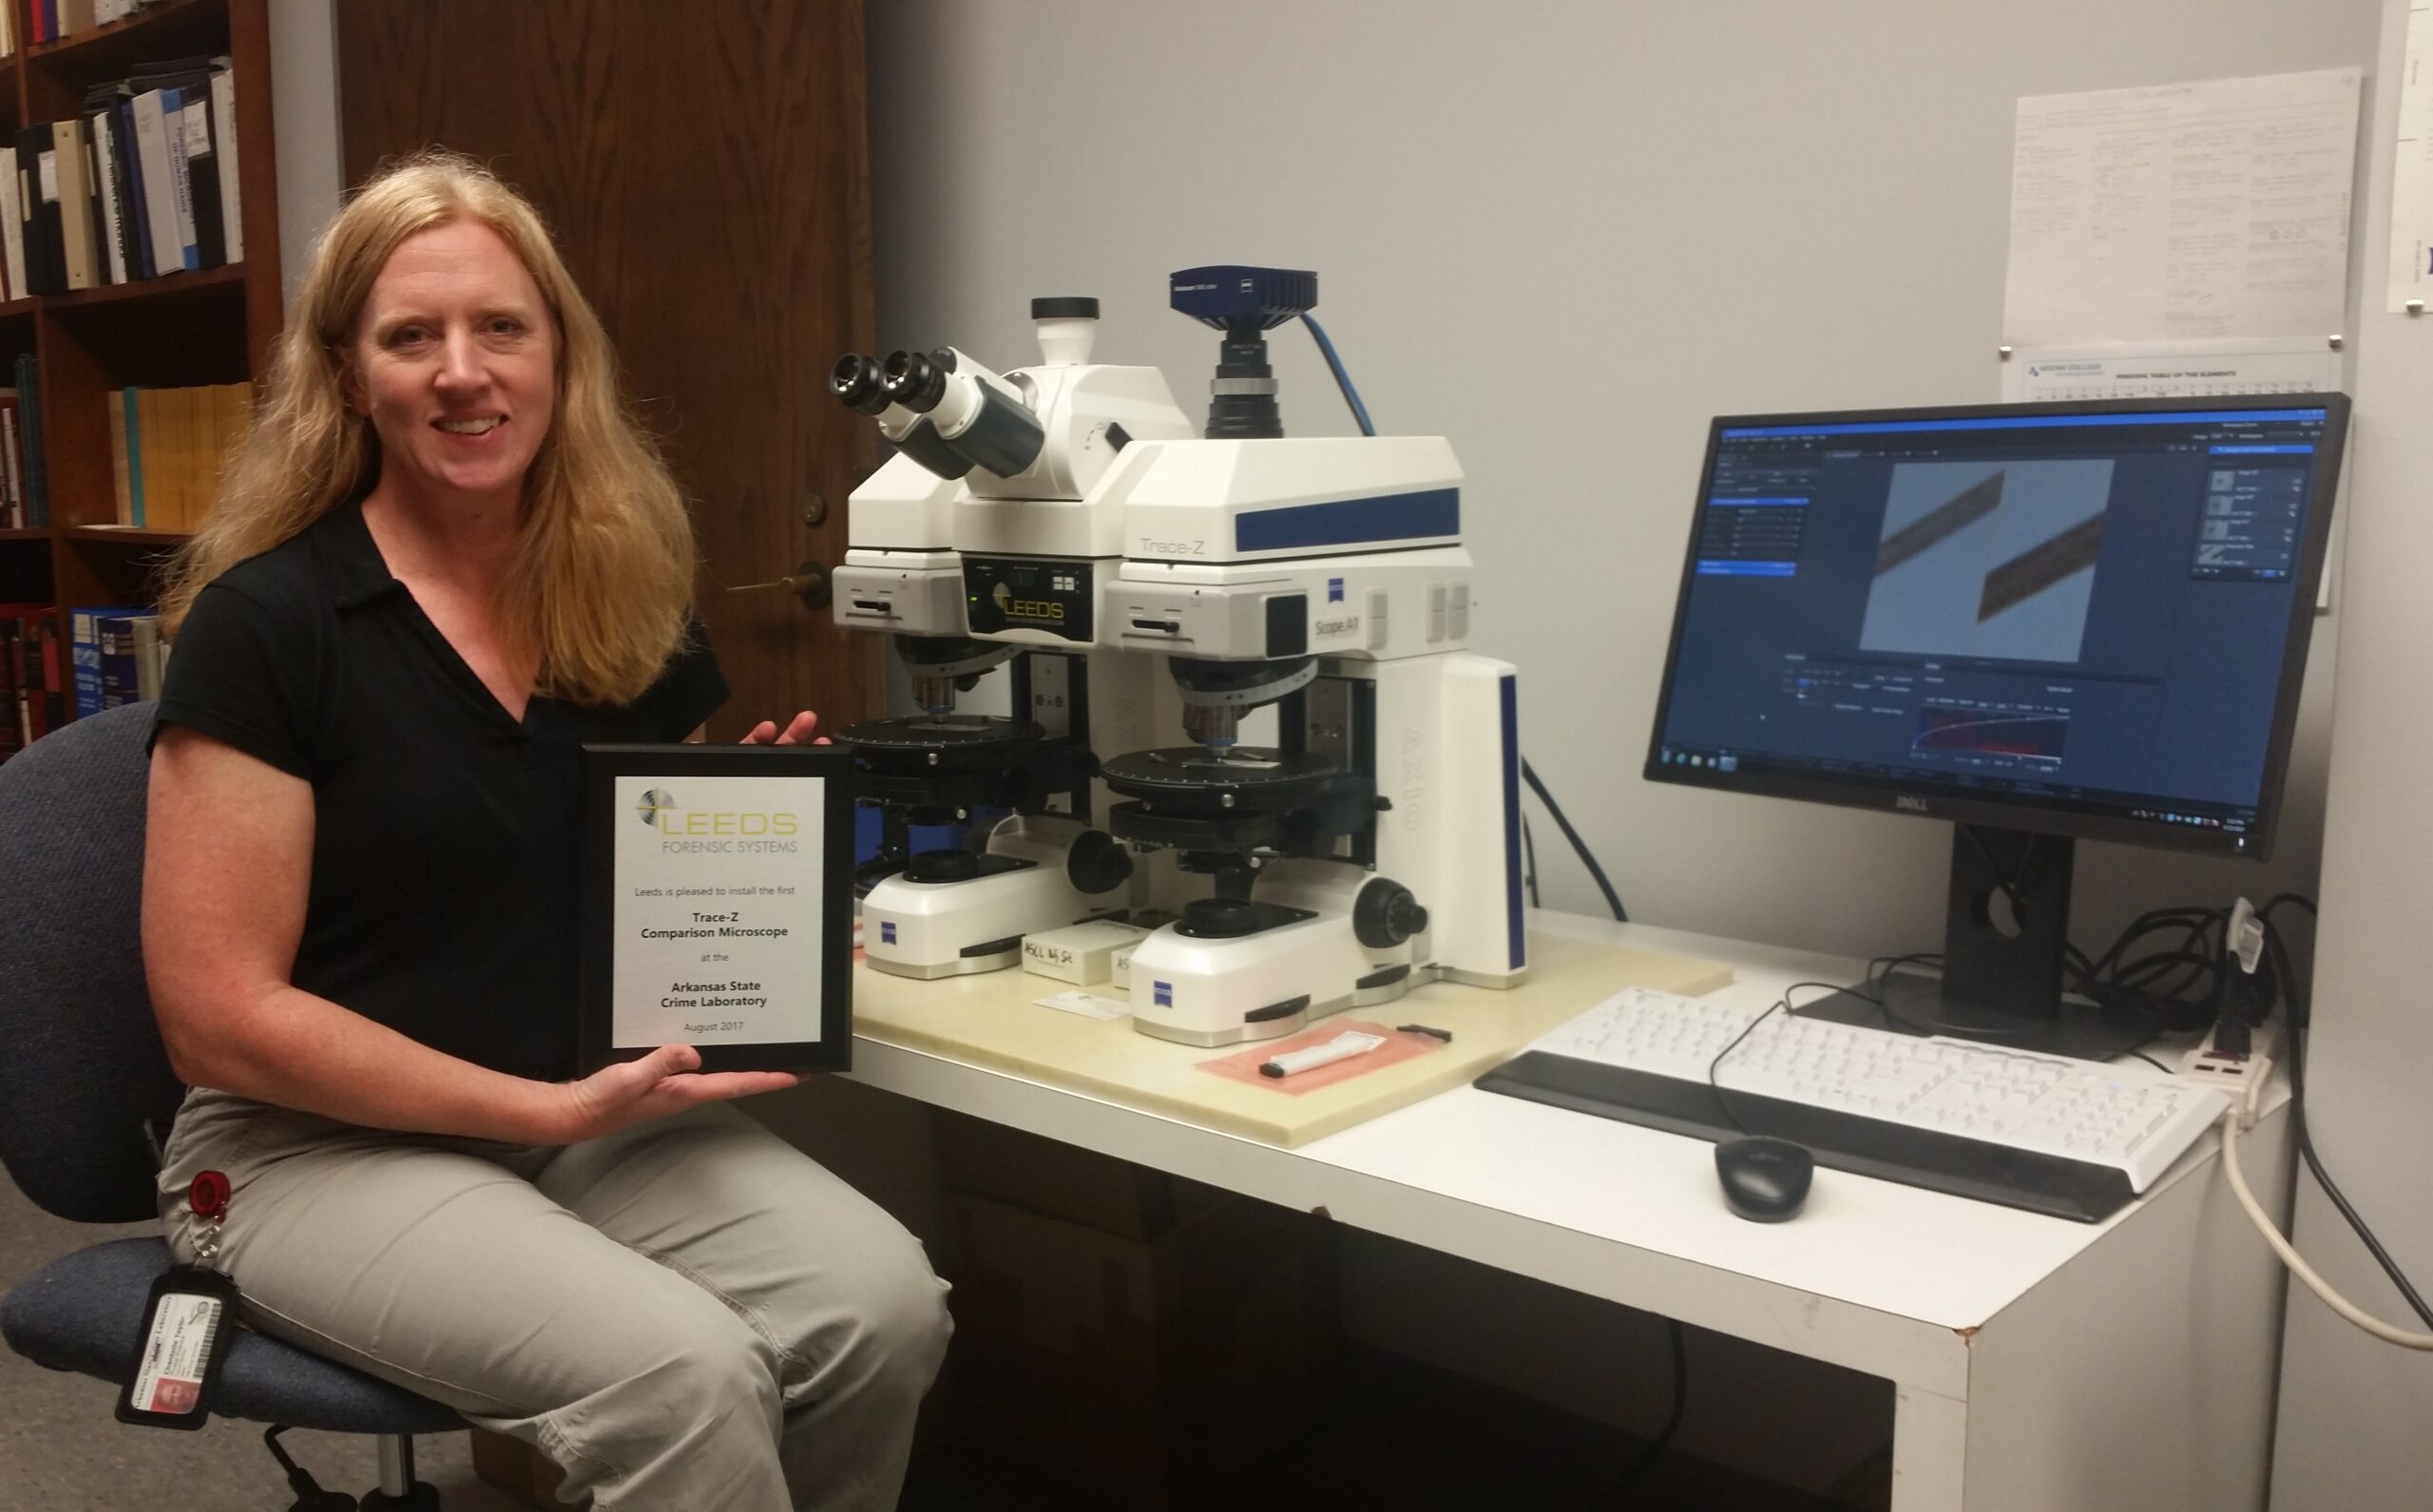 First Trace-Z Comparison Microscope installed at Arkansas Crime Lab